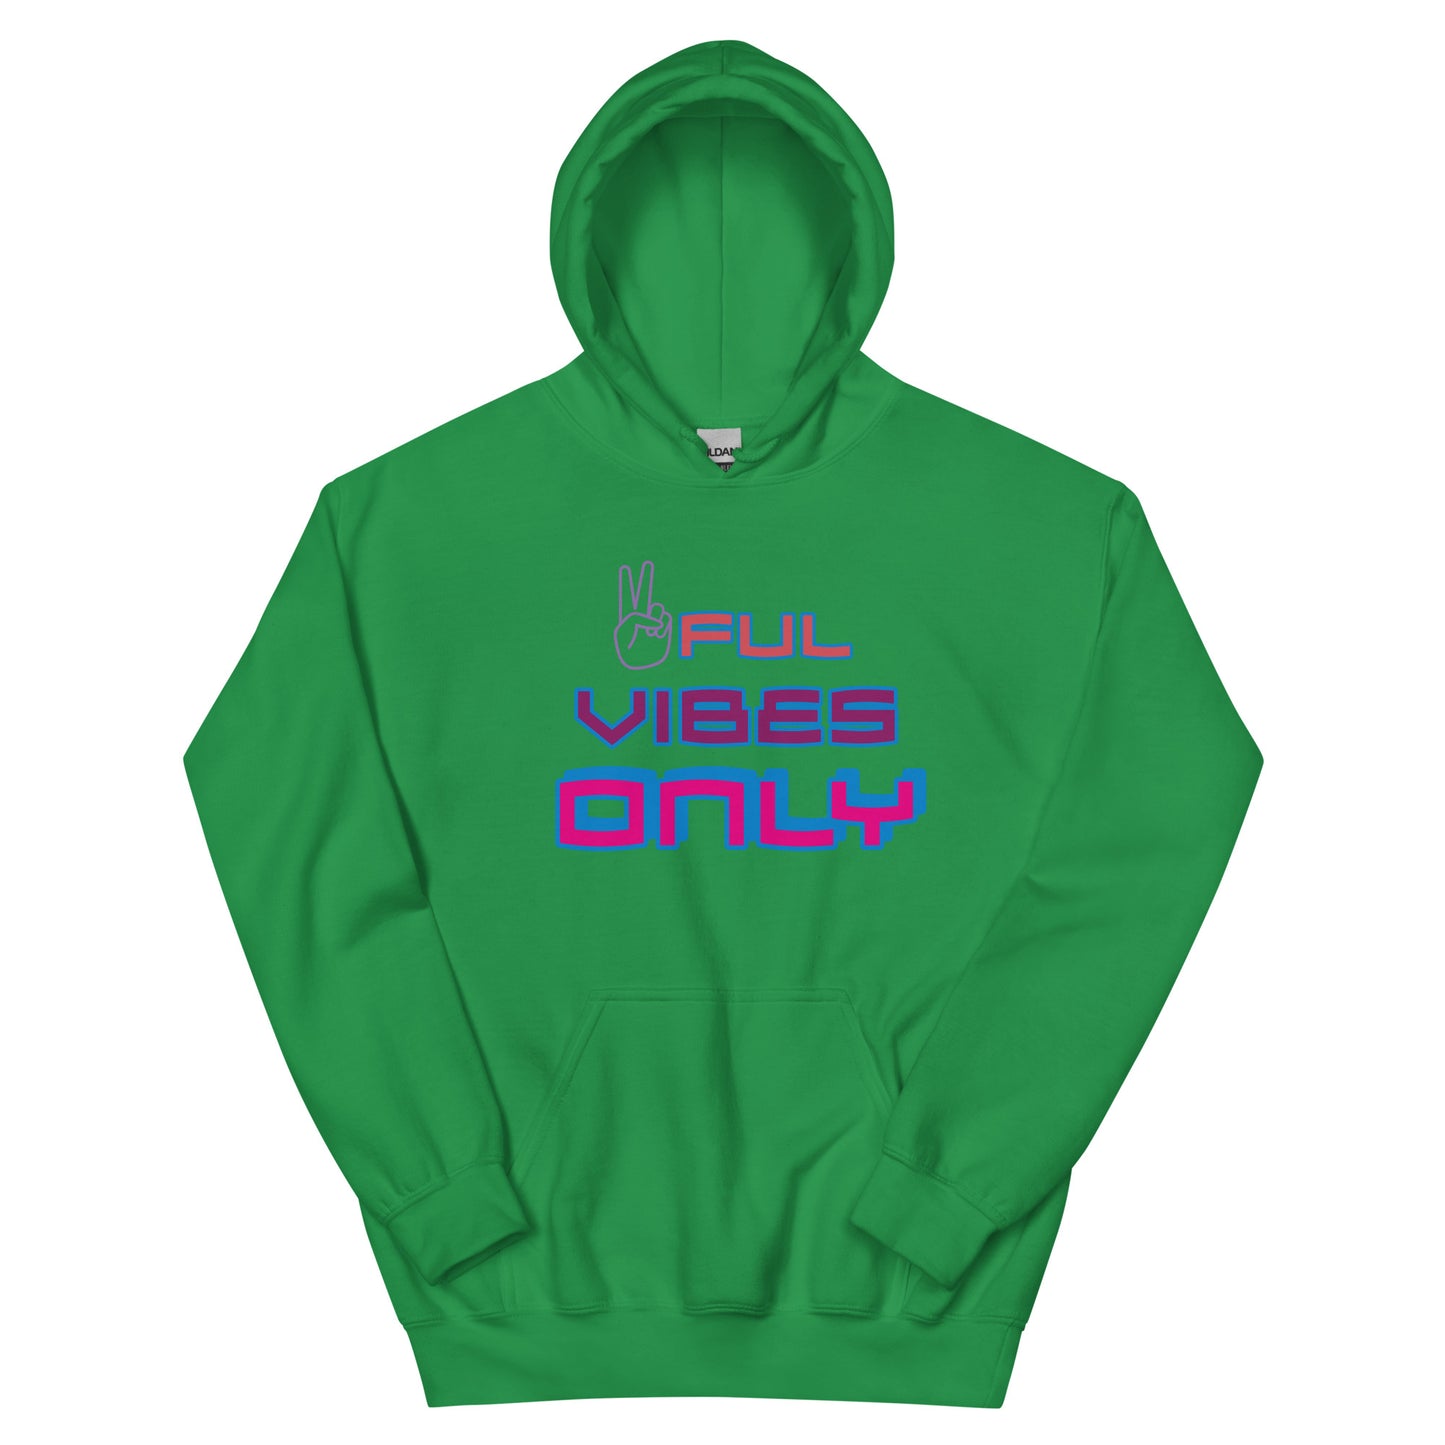 Peaceful Vibes Only (Blue and Purple Lettering) Unisex Hoodie